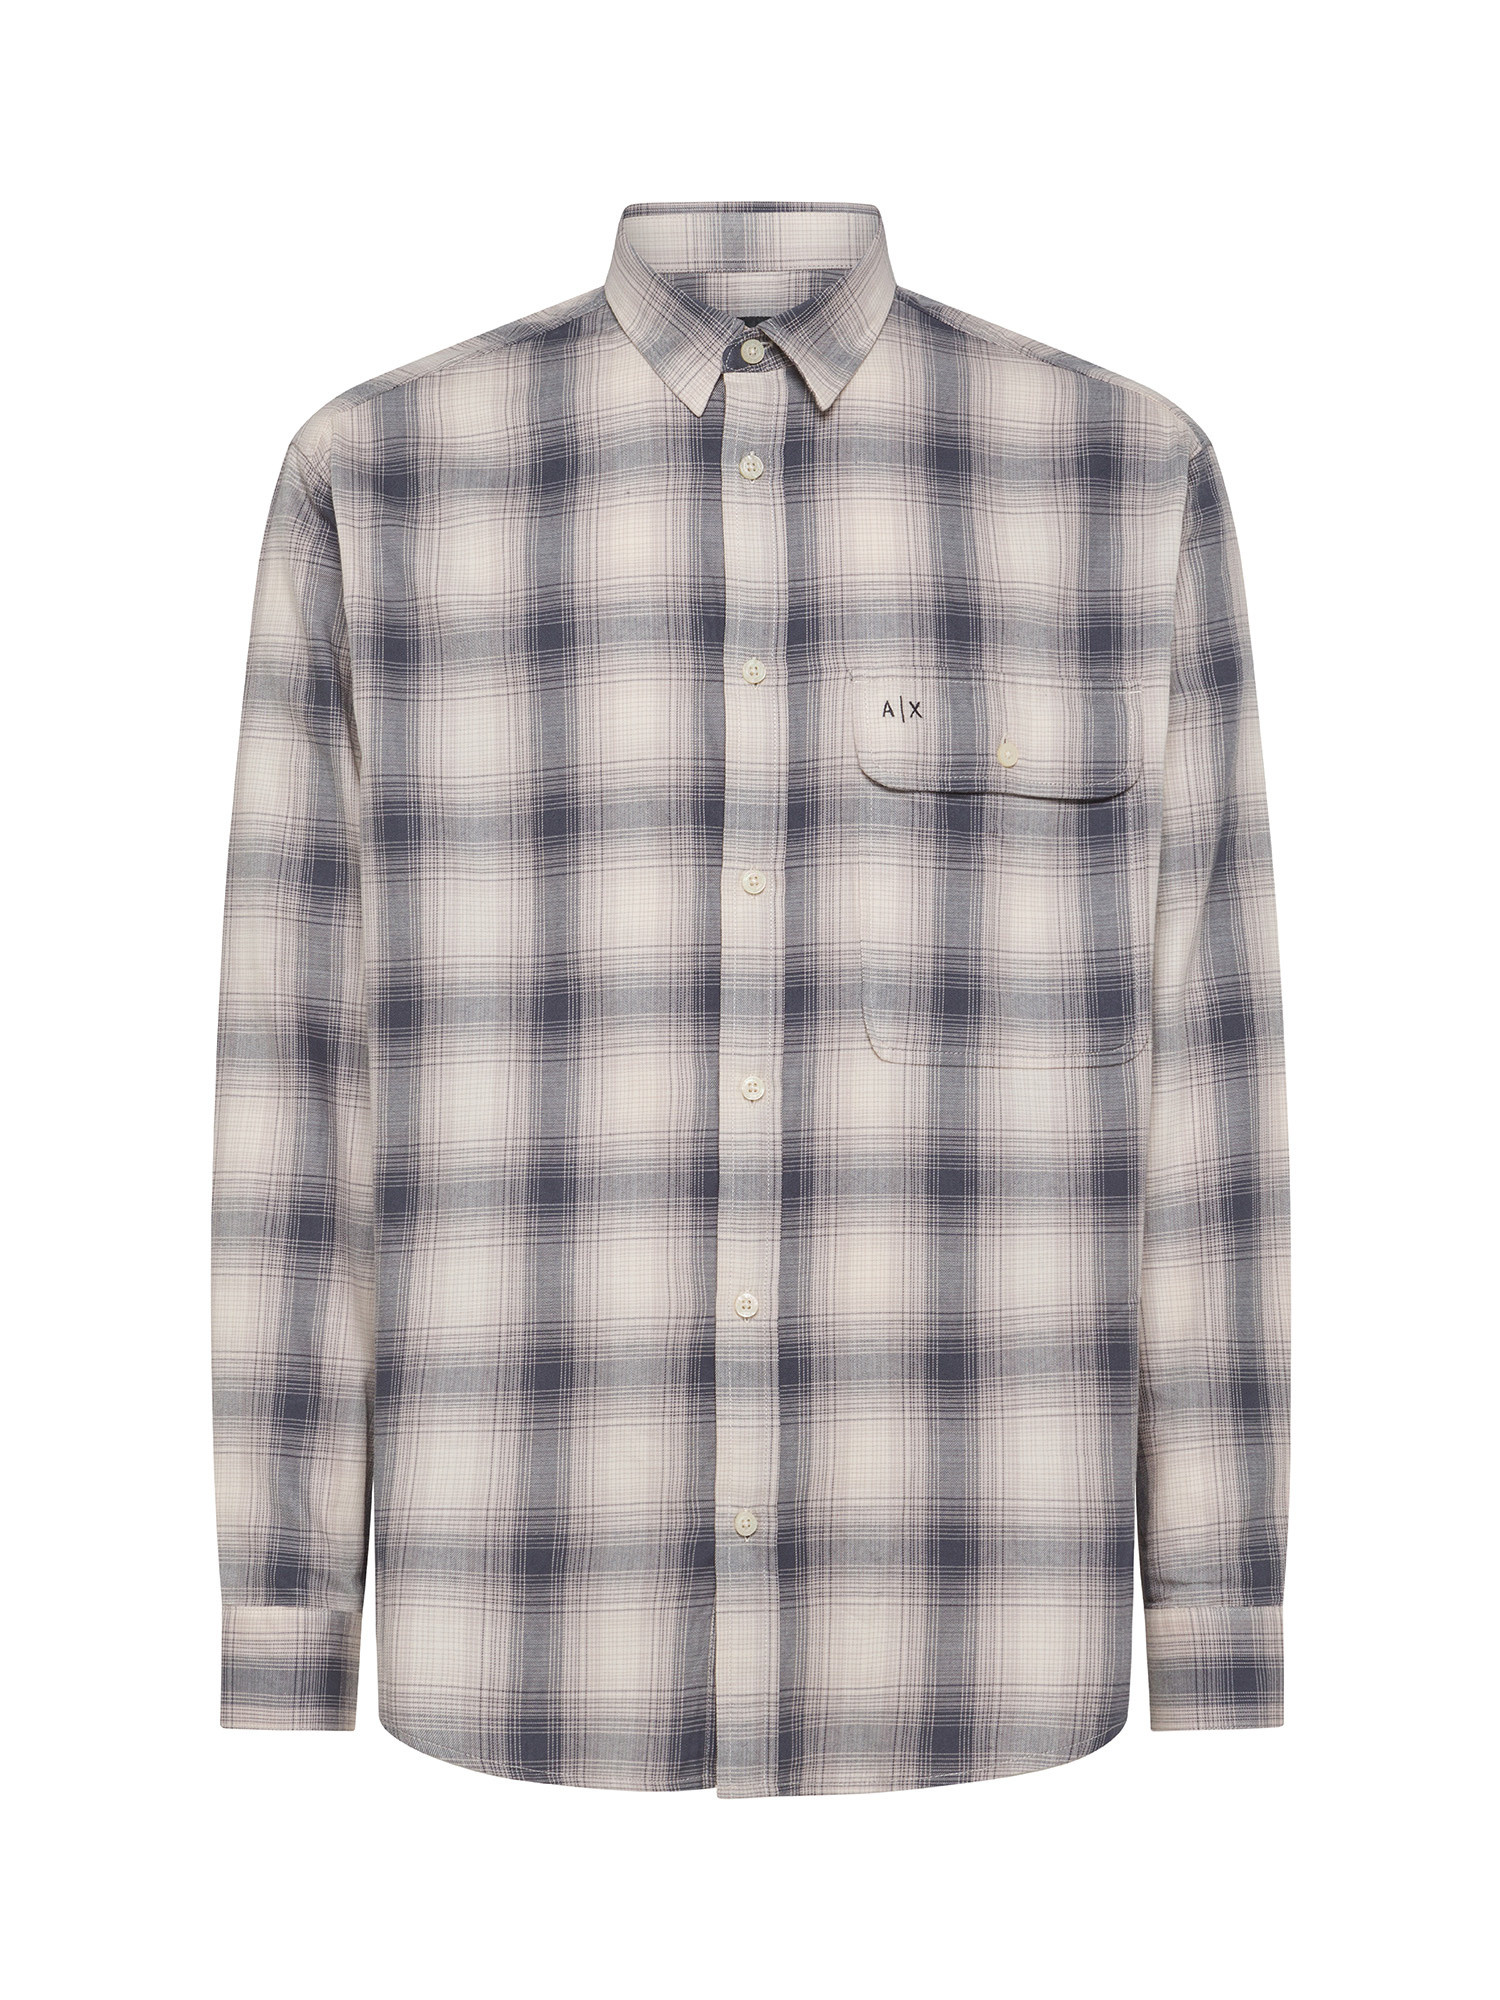 Armani Exchange - Checked shirt in cotton flannel, Beige, large image number 0